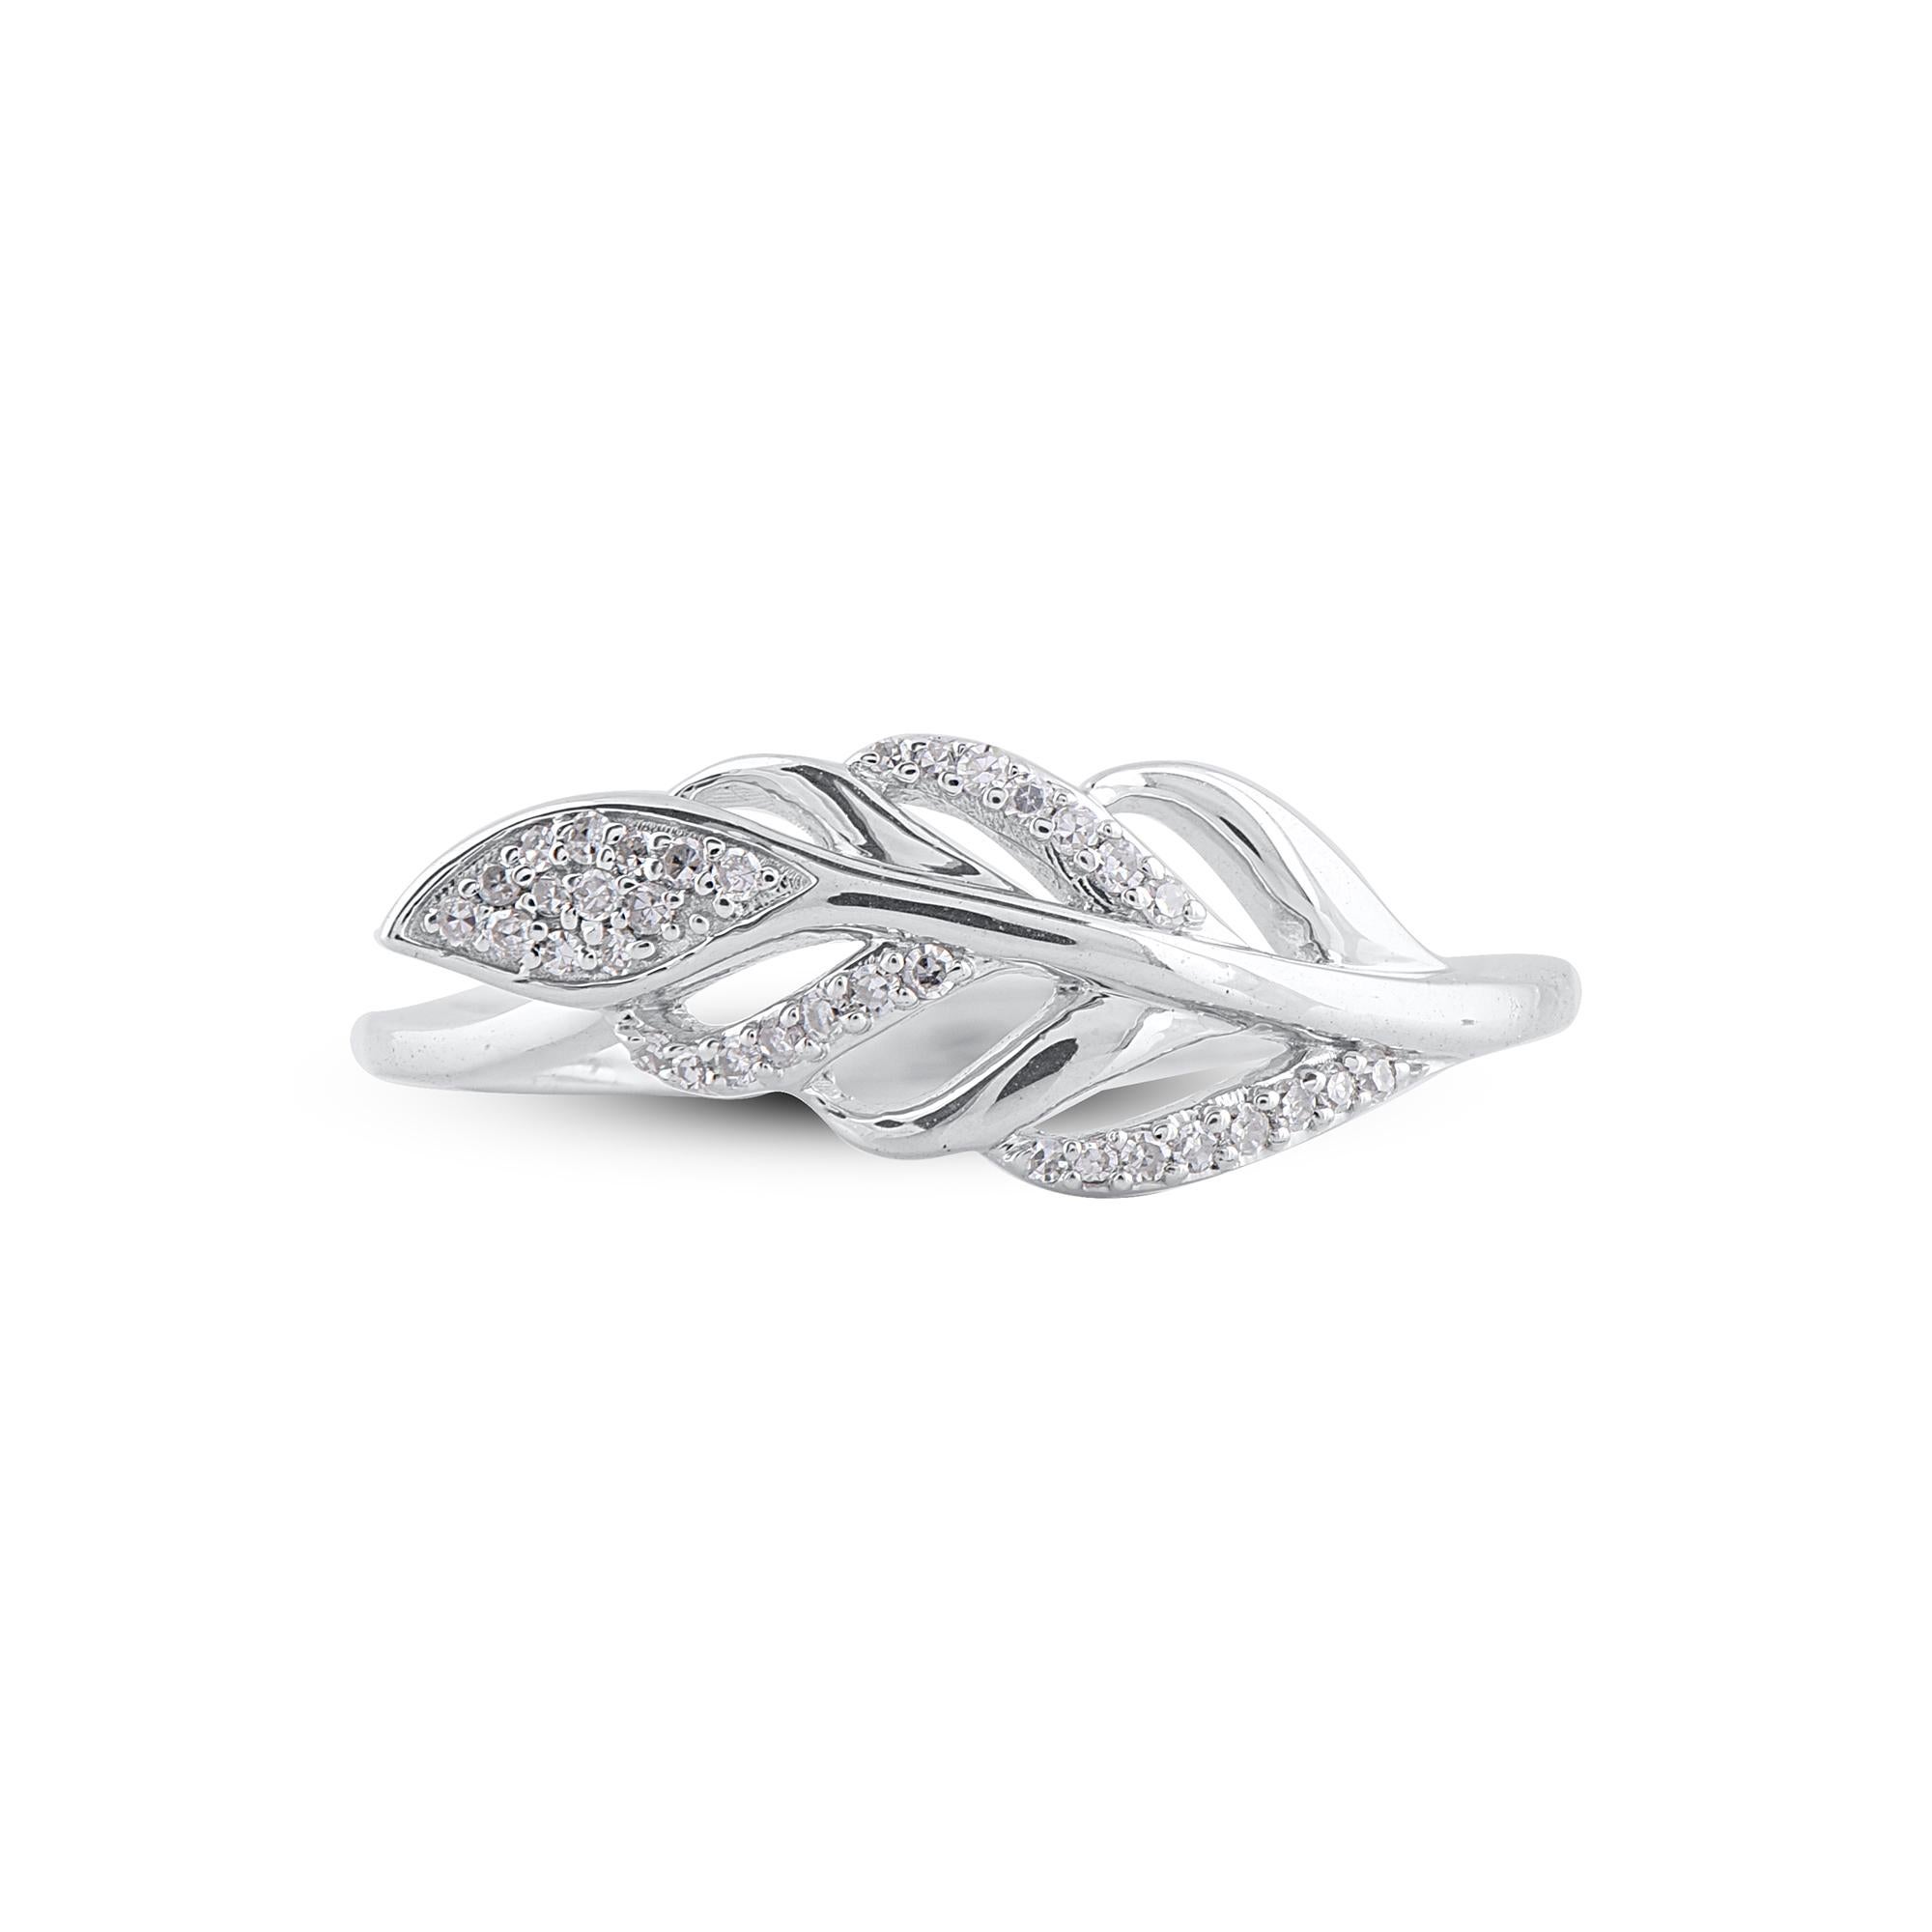 Find an enchanting new look when you wear this diamond feather ring. Beautifully crafted by our inhouse experts in 14 karat white gold and embellished with 35 single cut round diamond set in prong setting. Total diamond weight is 0.10 carat. The